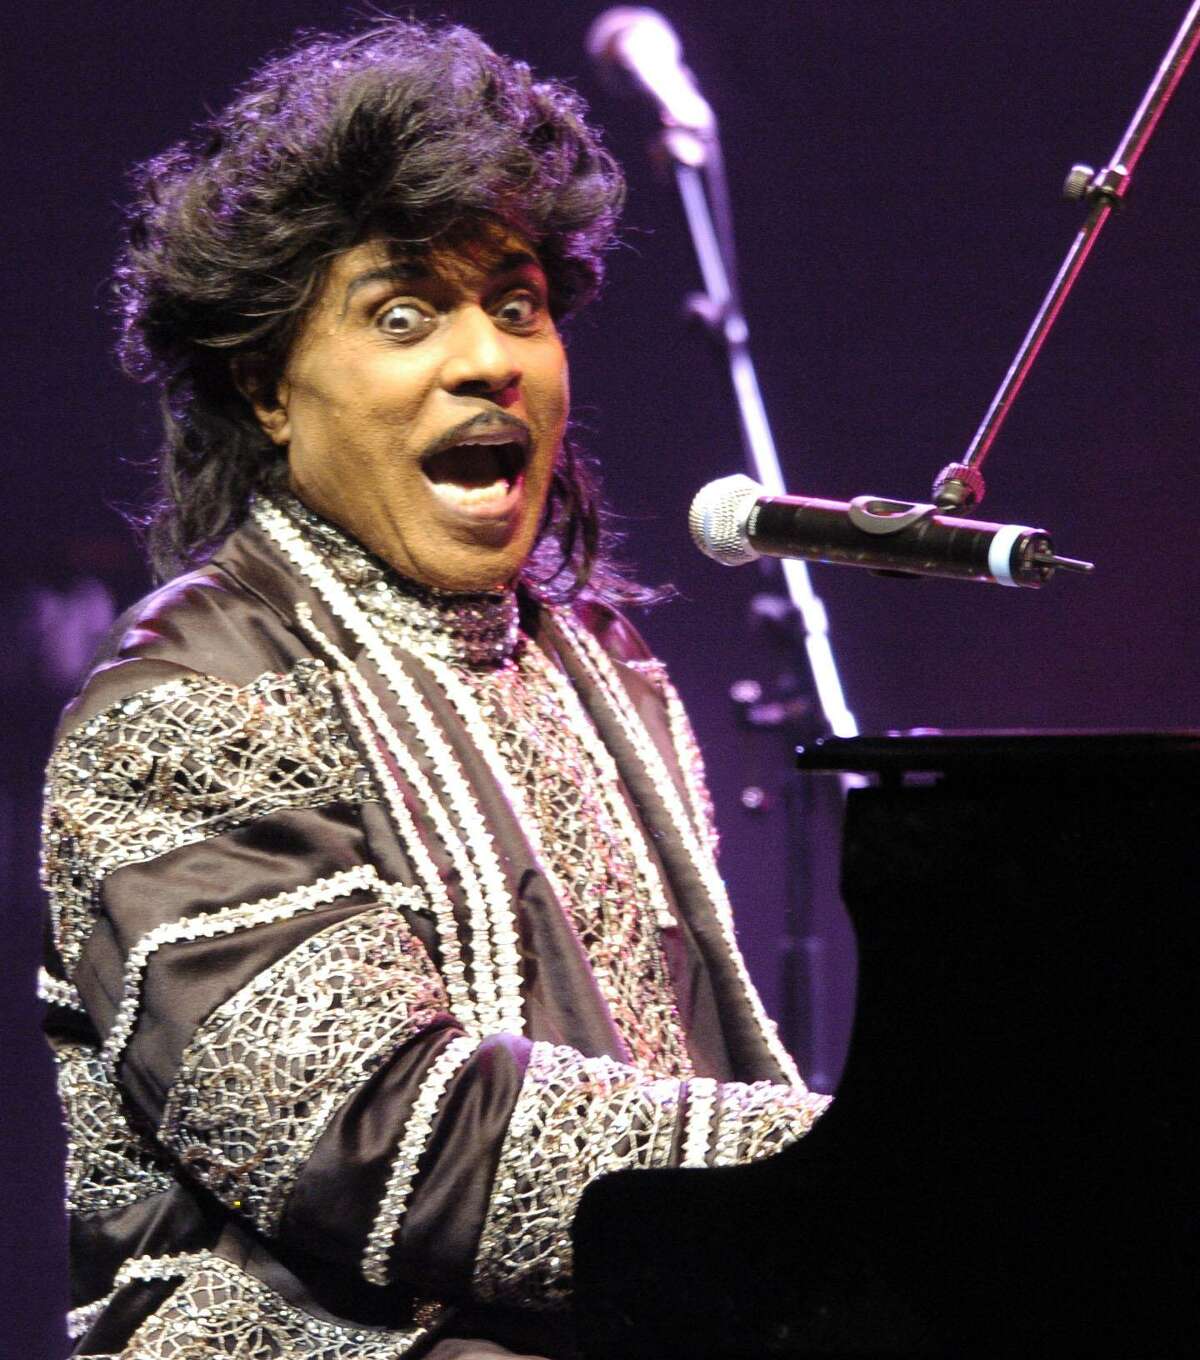 Through the fury with which he attacked the piano, and the amazing power and elasticity of his voice, Little Richard was a flamboyant force of nature. His musical legacy can be found in an array of artists.